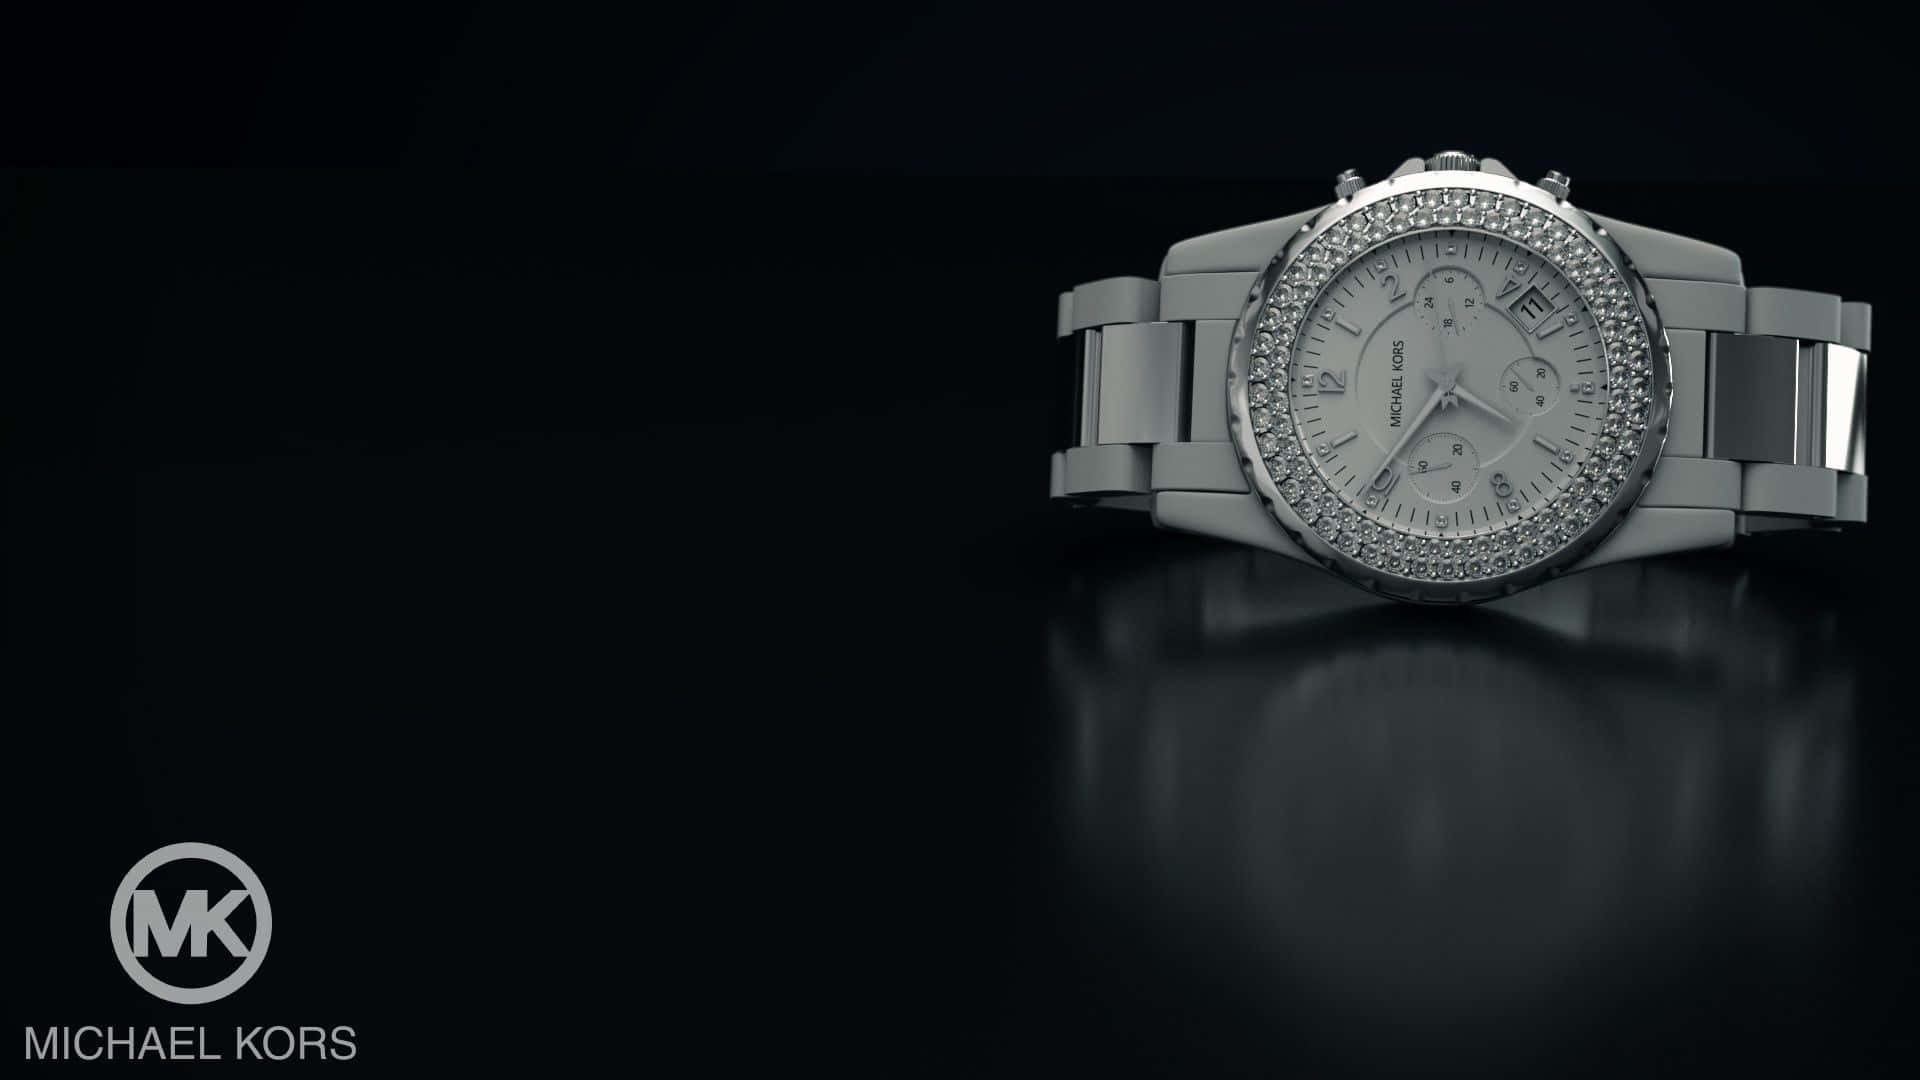 Michael Kors Watches - A Silver Watch With Diamonds